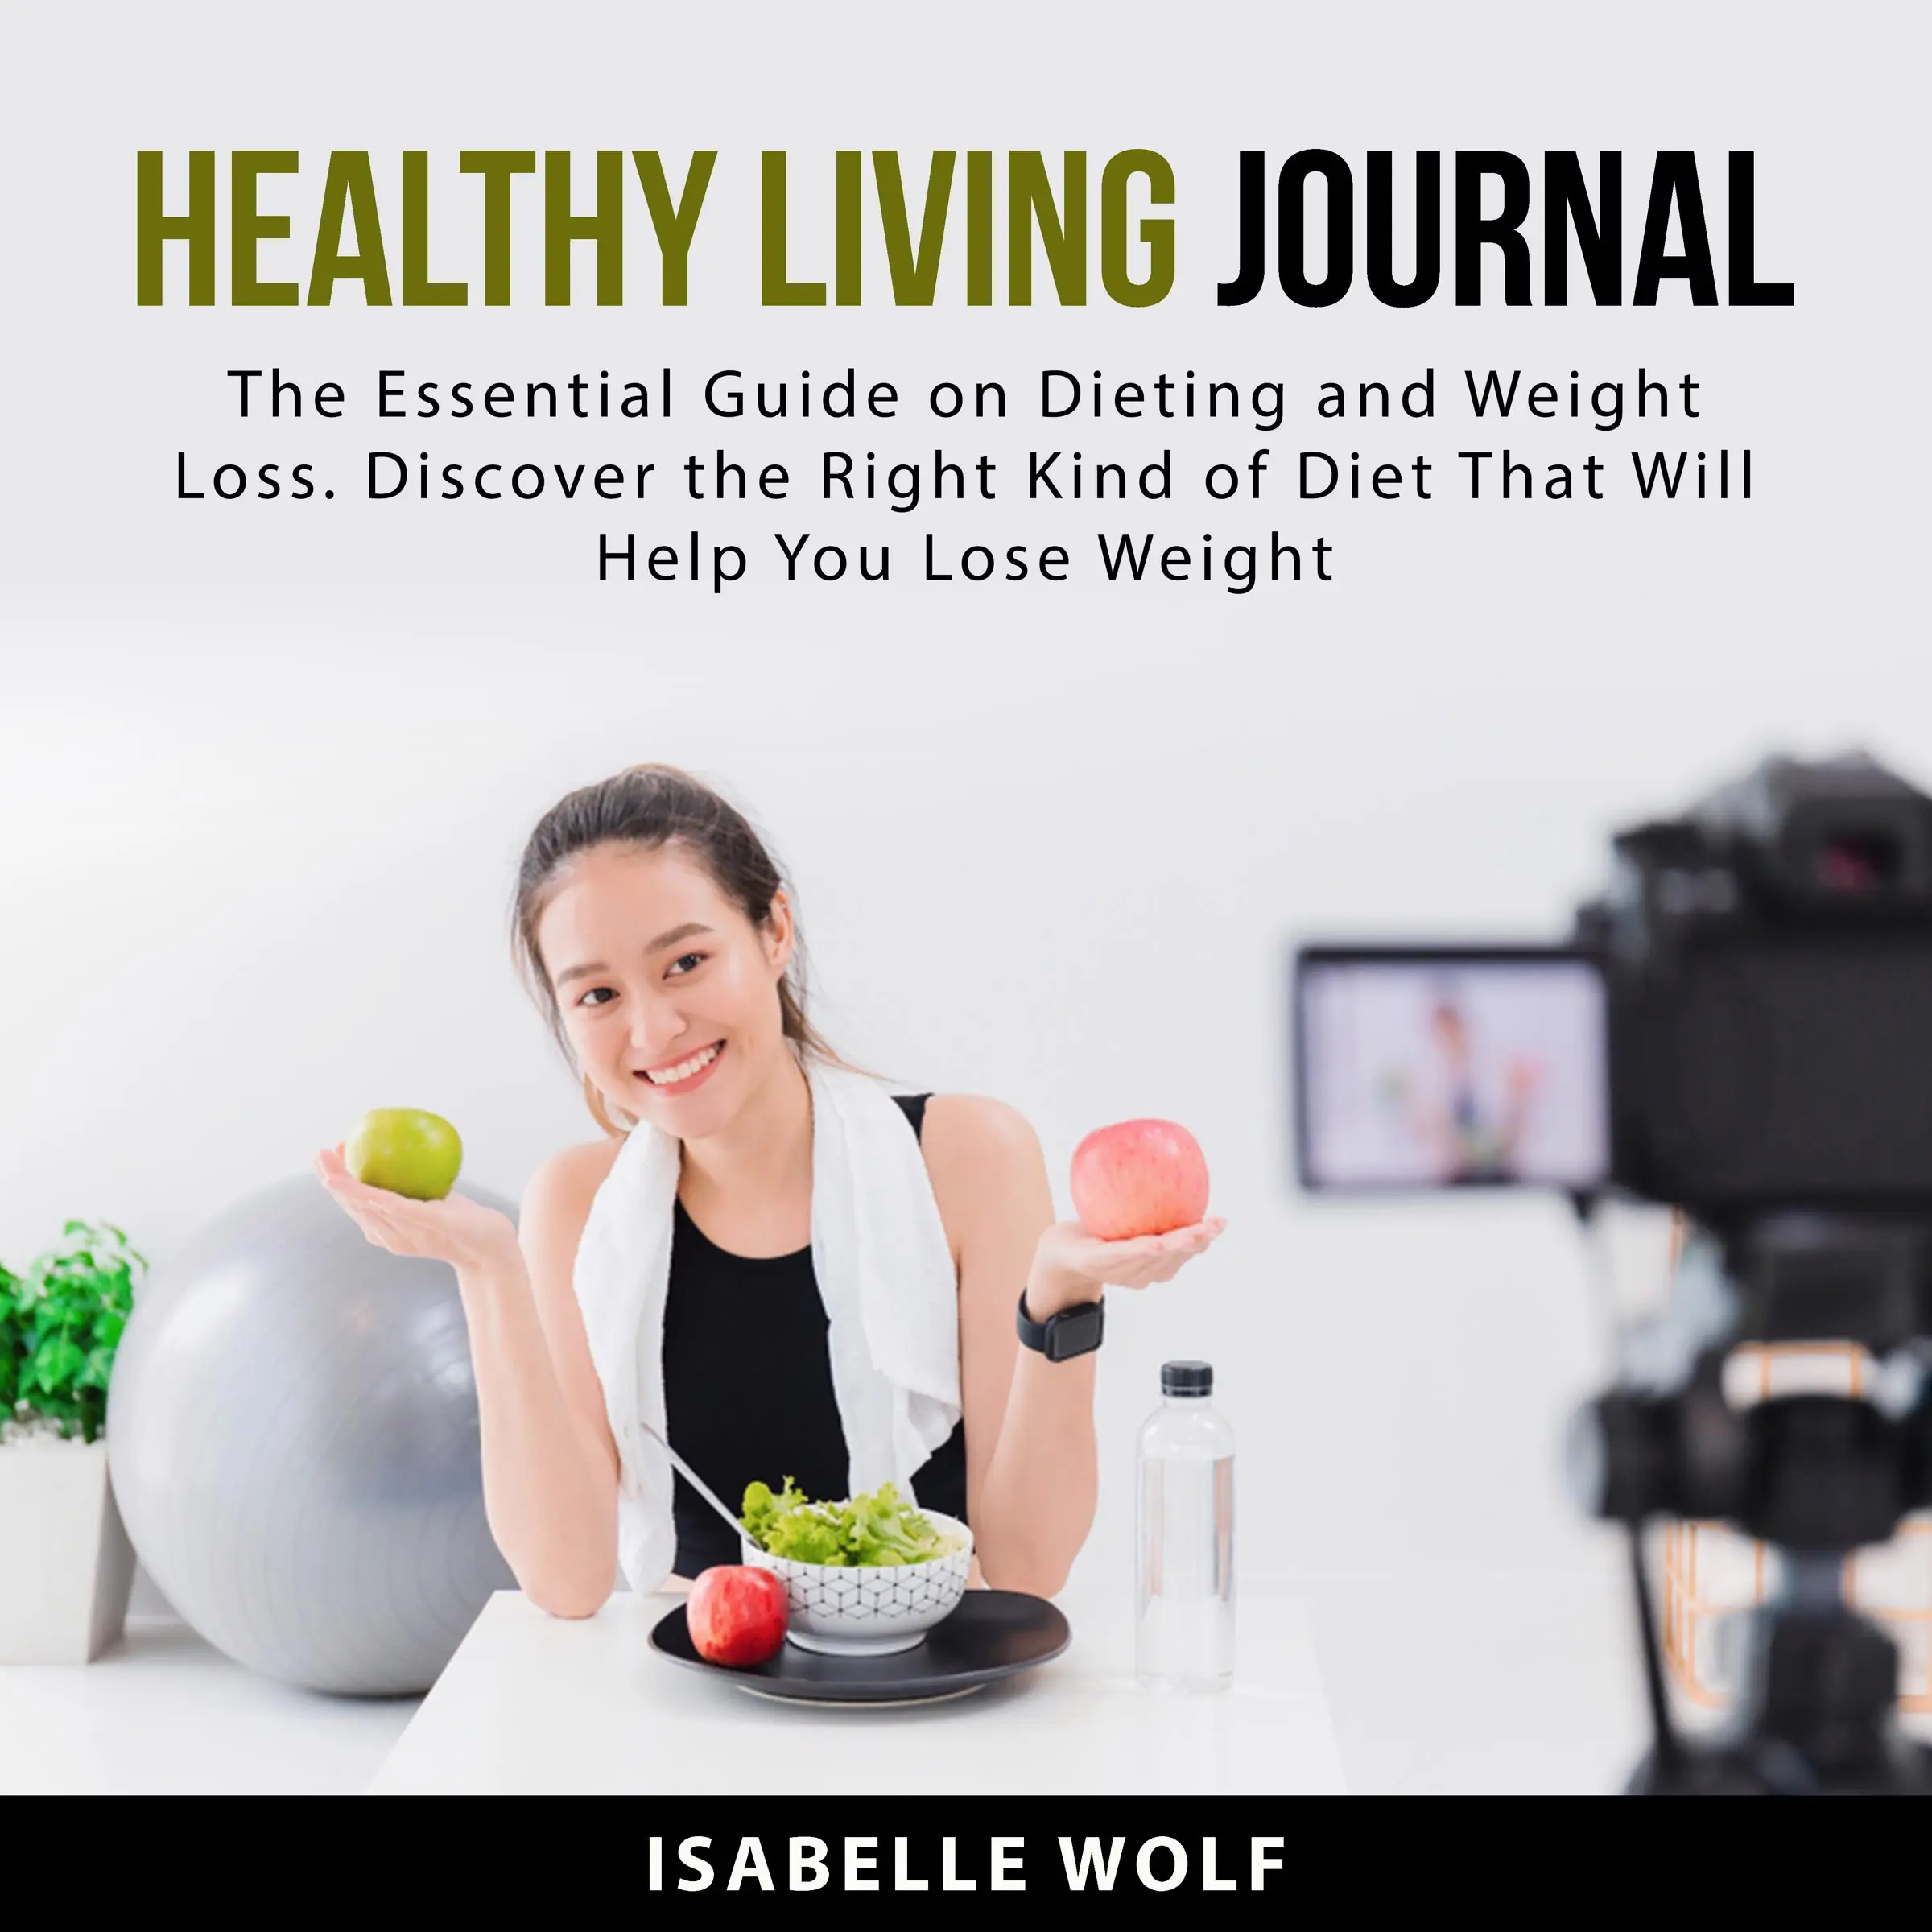 Healthy Living Journal: The Essential Guide on Dieting and Weight Loss. Discover the Right Kind of Diet That Will Help You Lose Weight Audiobook by Isabelle Wolf